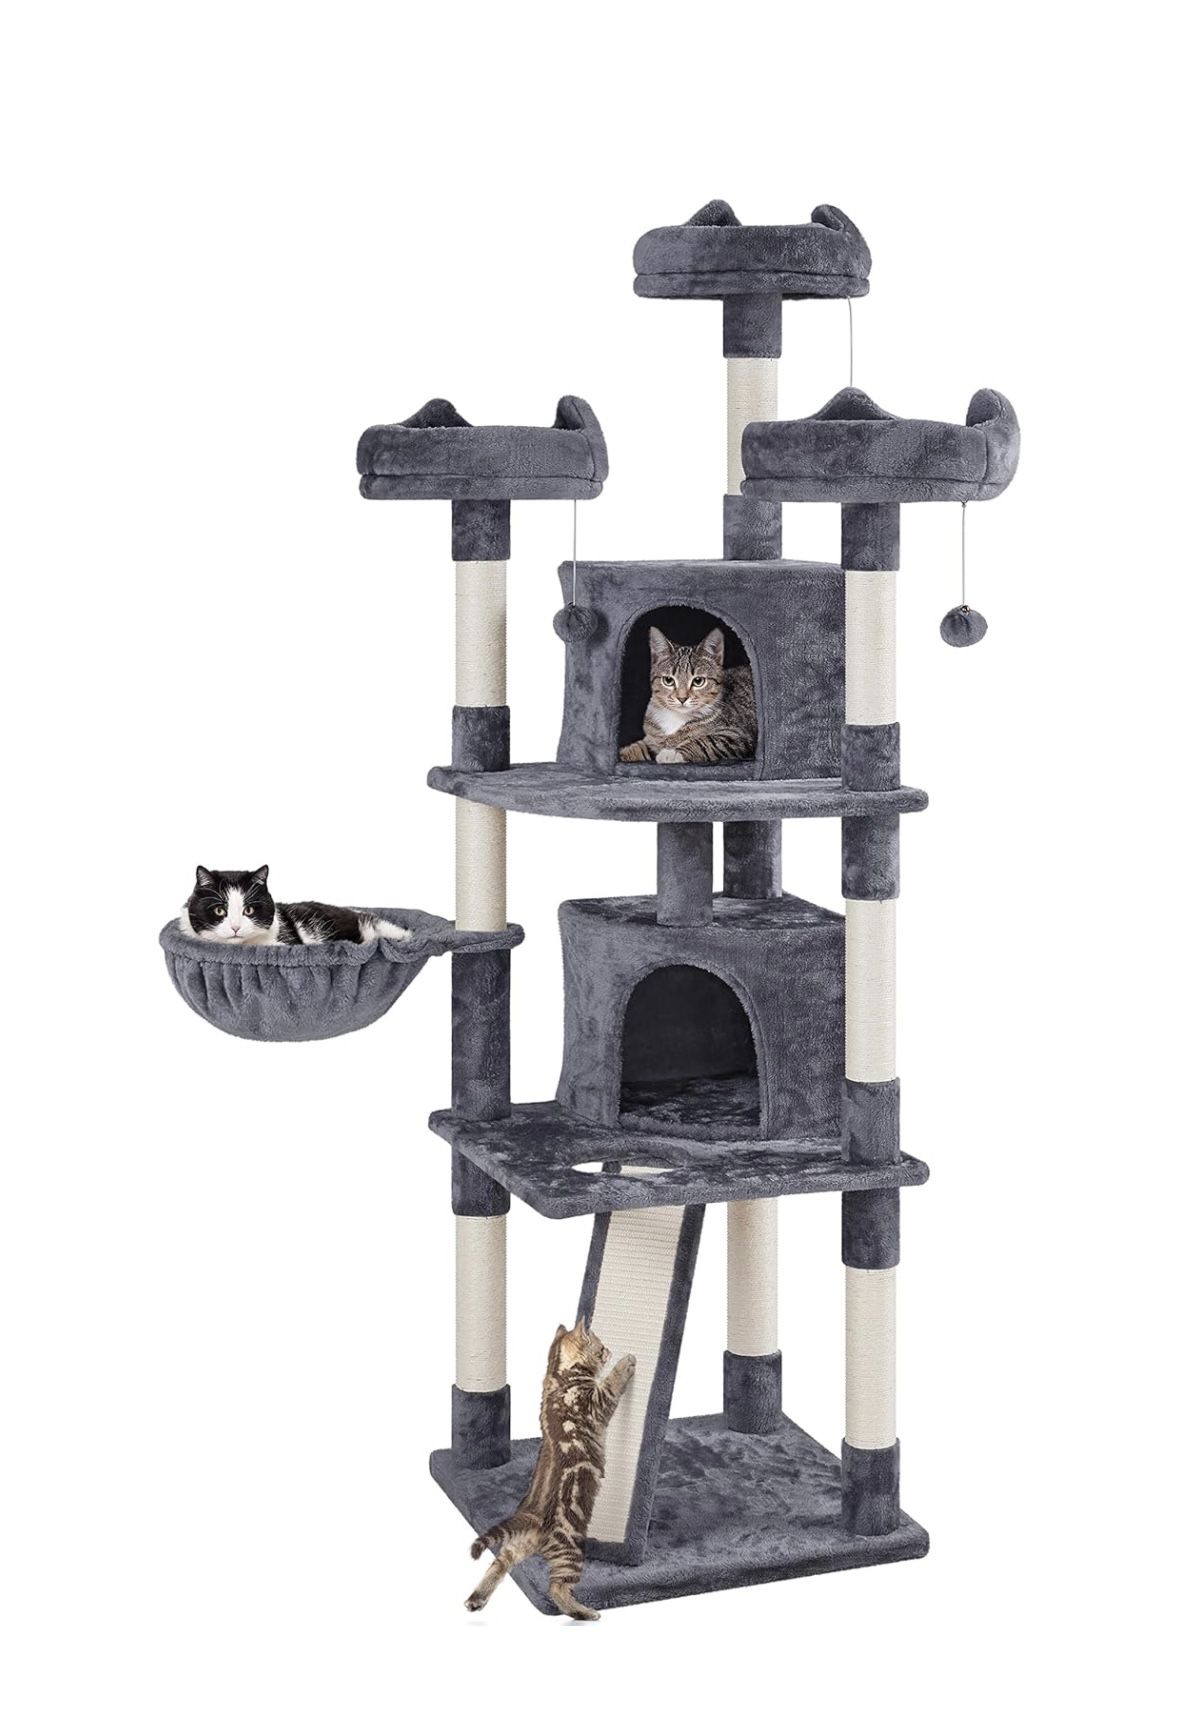 76"H Large Cat Tree, Multilevel Cat House Plush Cat Tower with 2 Condos & 8 Scratching Posts for Kittens